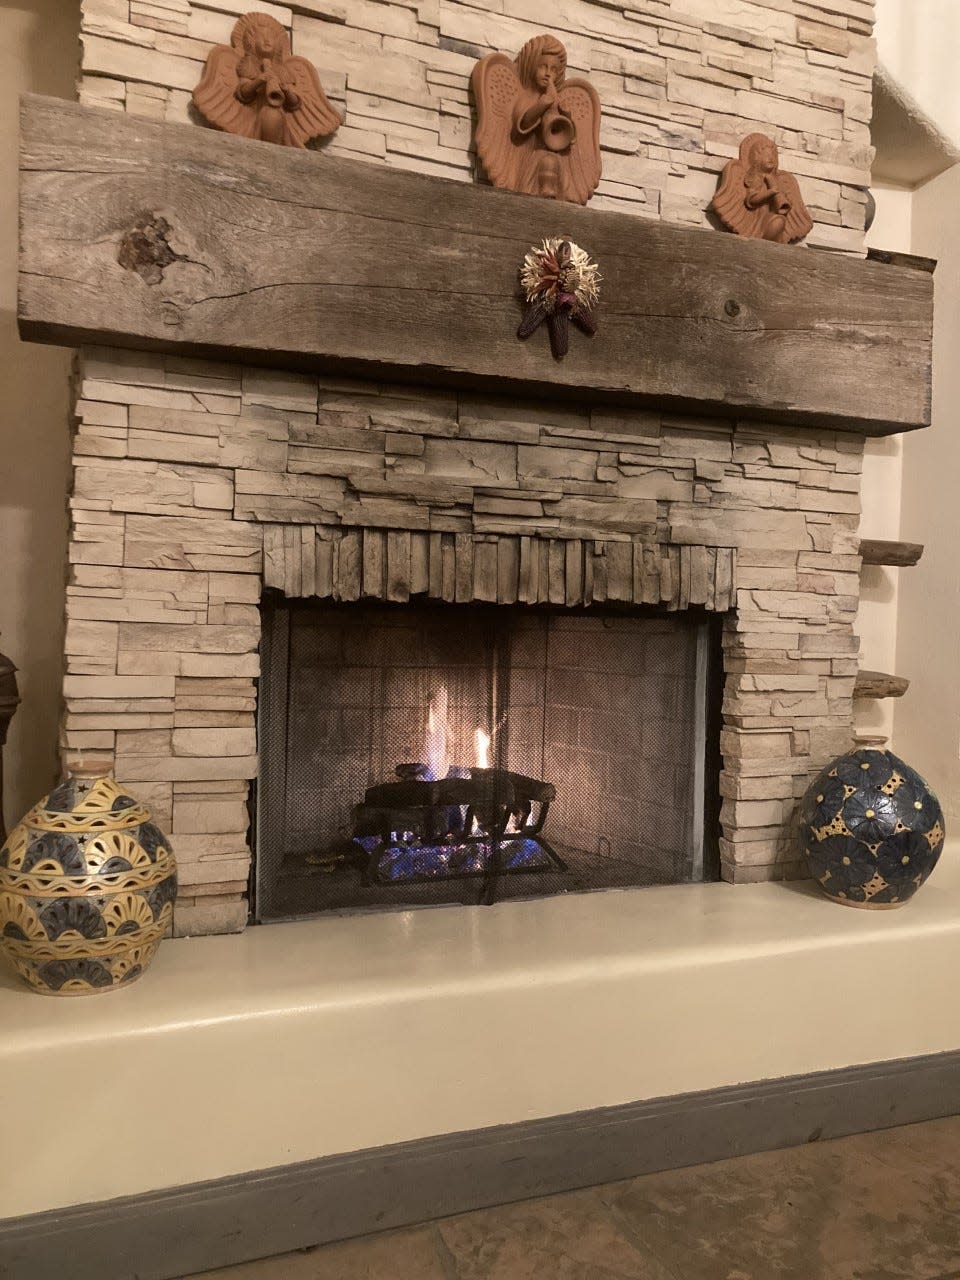 Relax and unwind near the fireplace in the lobby of The Lodge at Santa Fe after a five-hour drive from El Paso. The hotel offers two complimentary drinks per night.